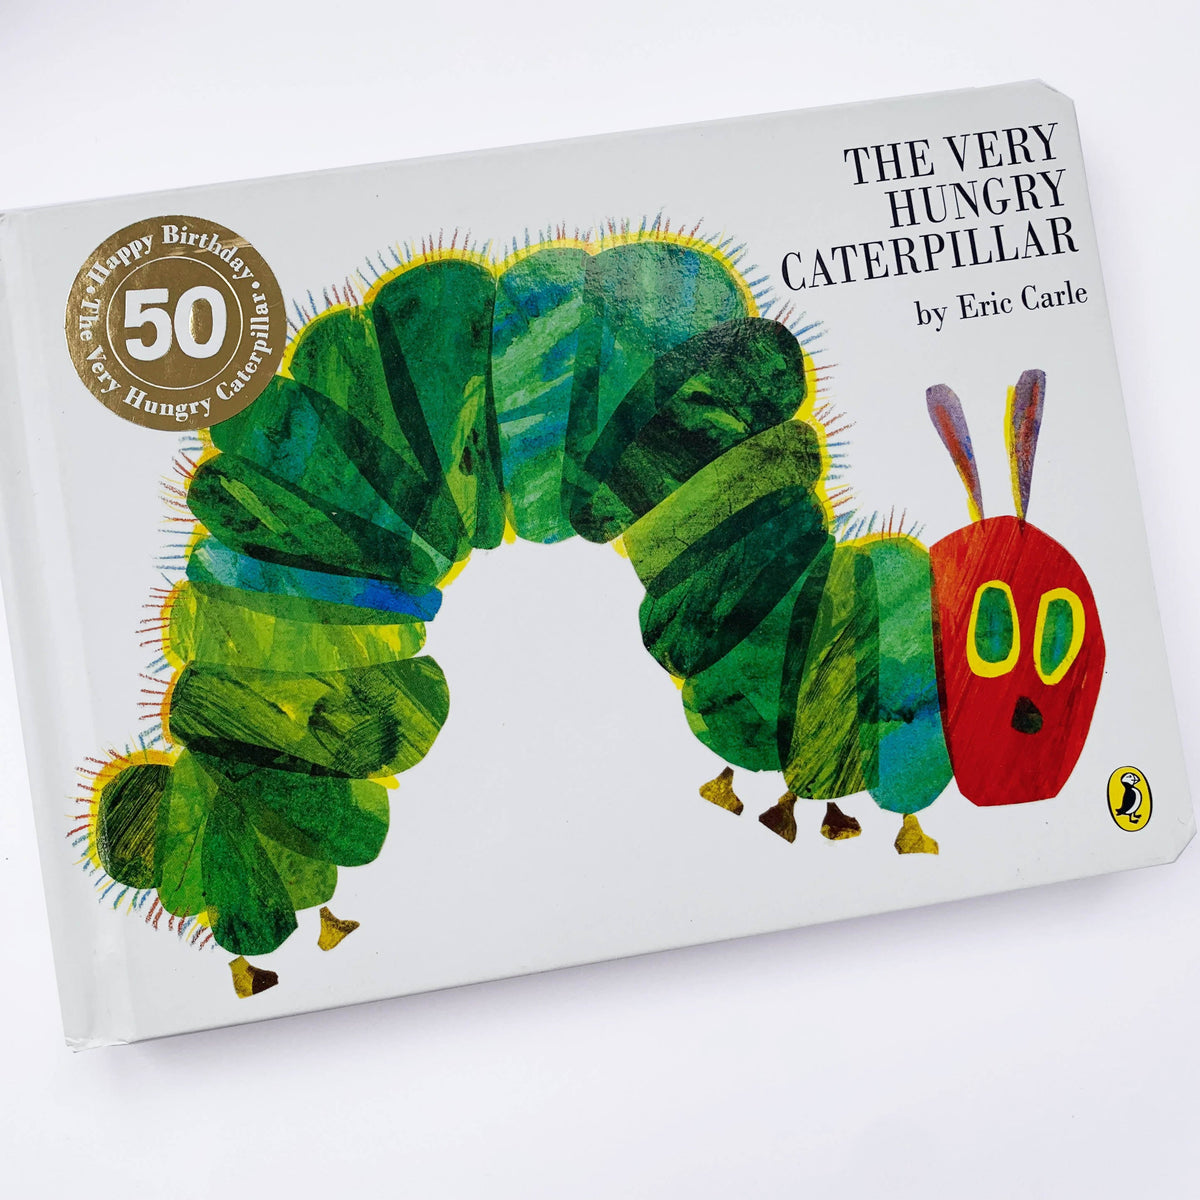 The Very Hungry Caterpillar Dominos Gift Set for Infants and Toddlers